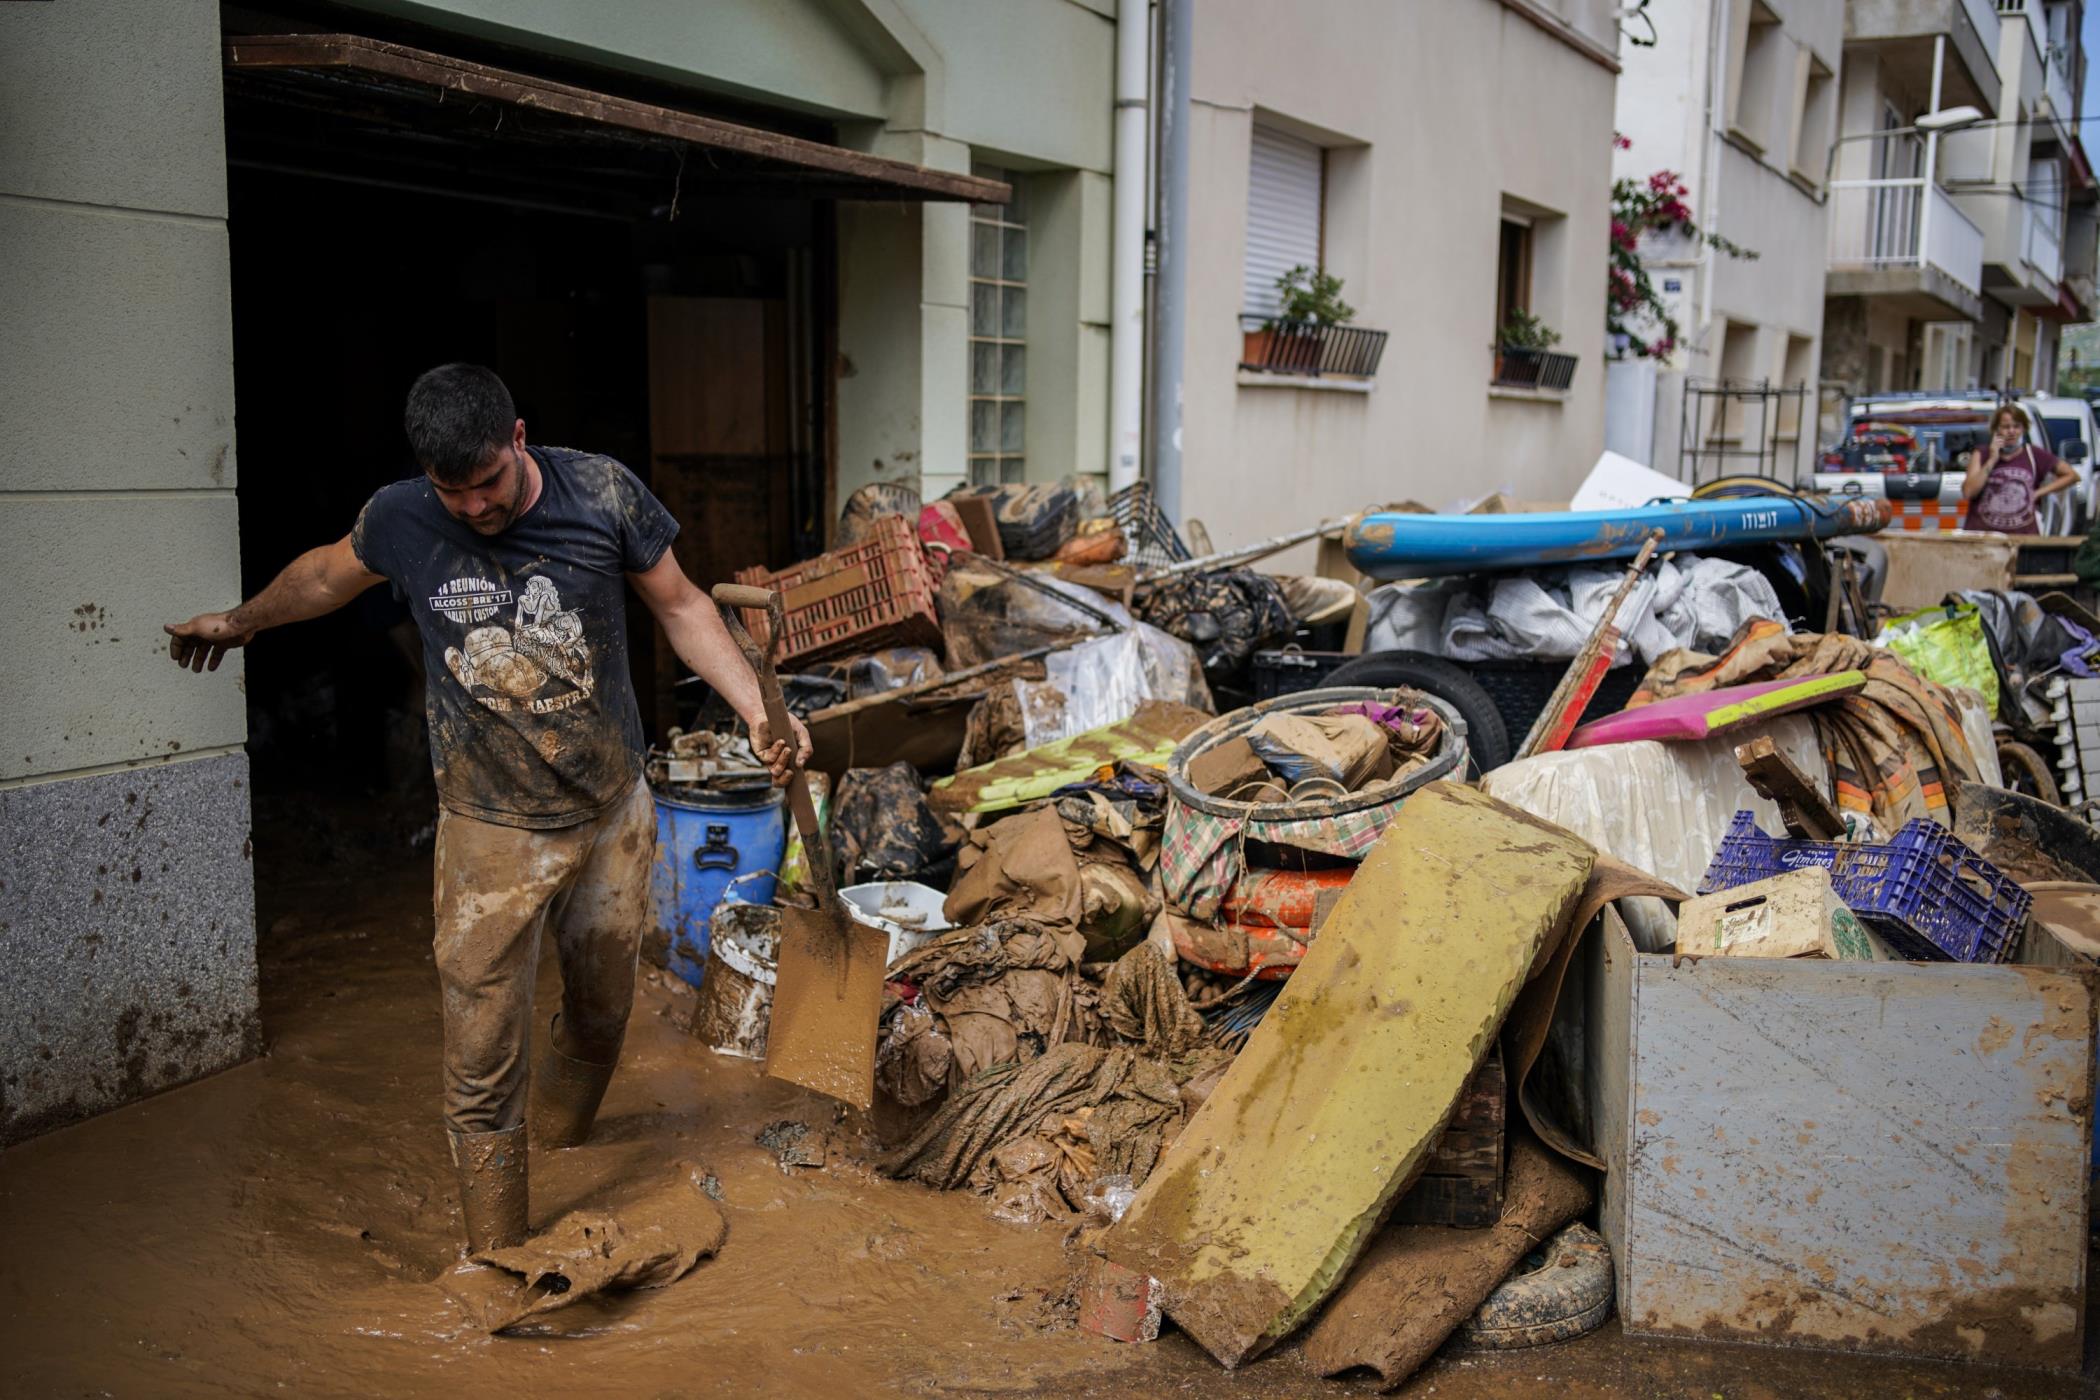 A man cleans up mud after flooding in a seaside town of Alcanar, in northeastern Spain, Sept. 2, 2021. (AP Photo)